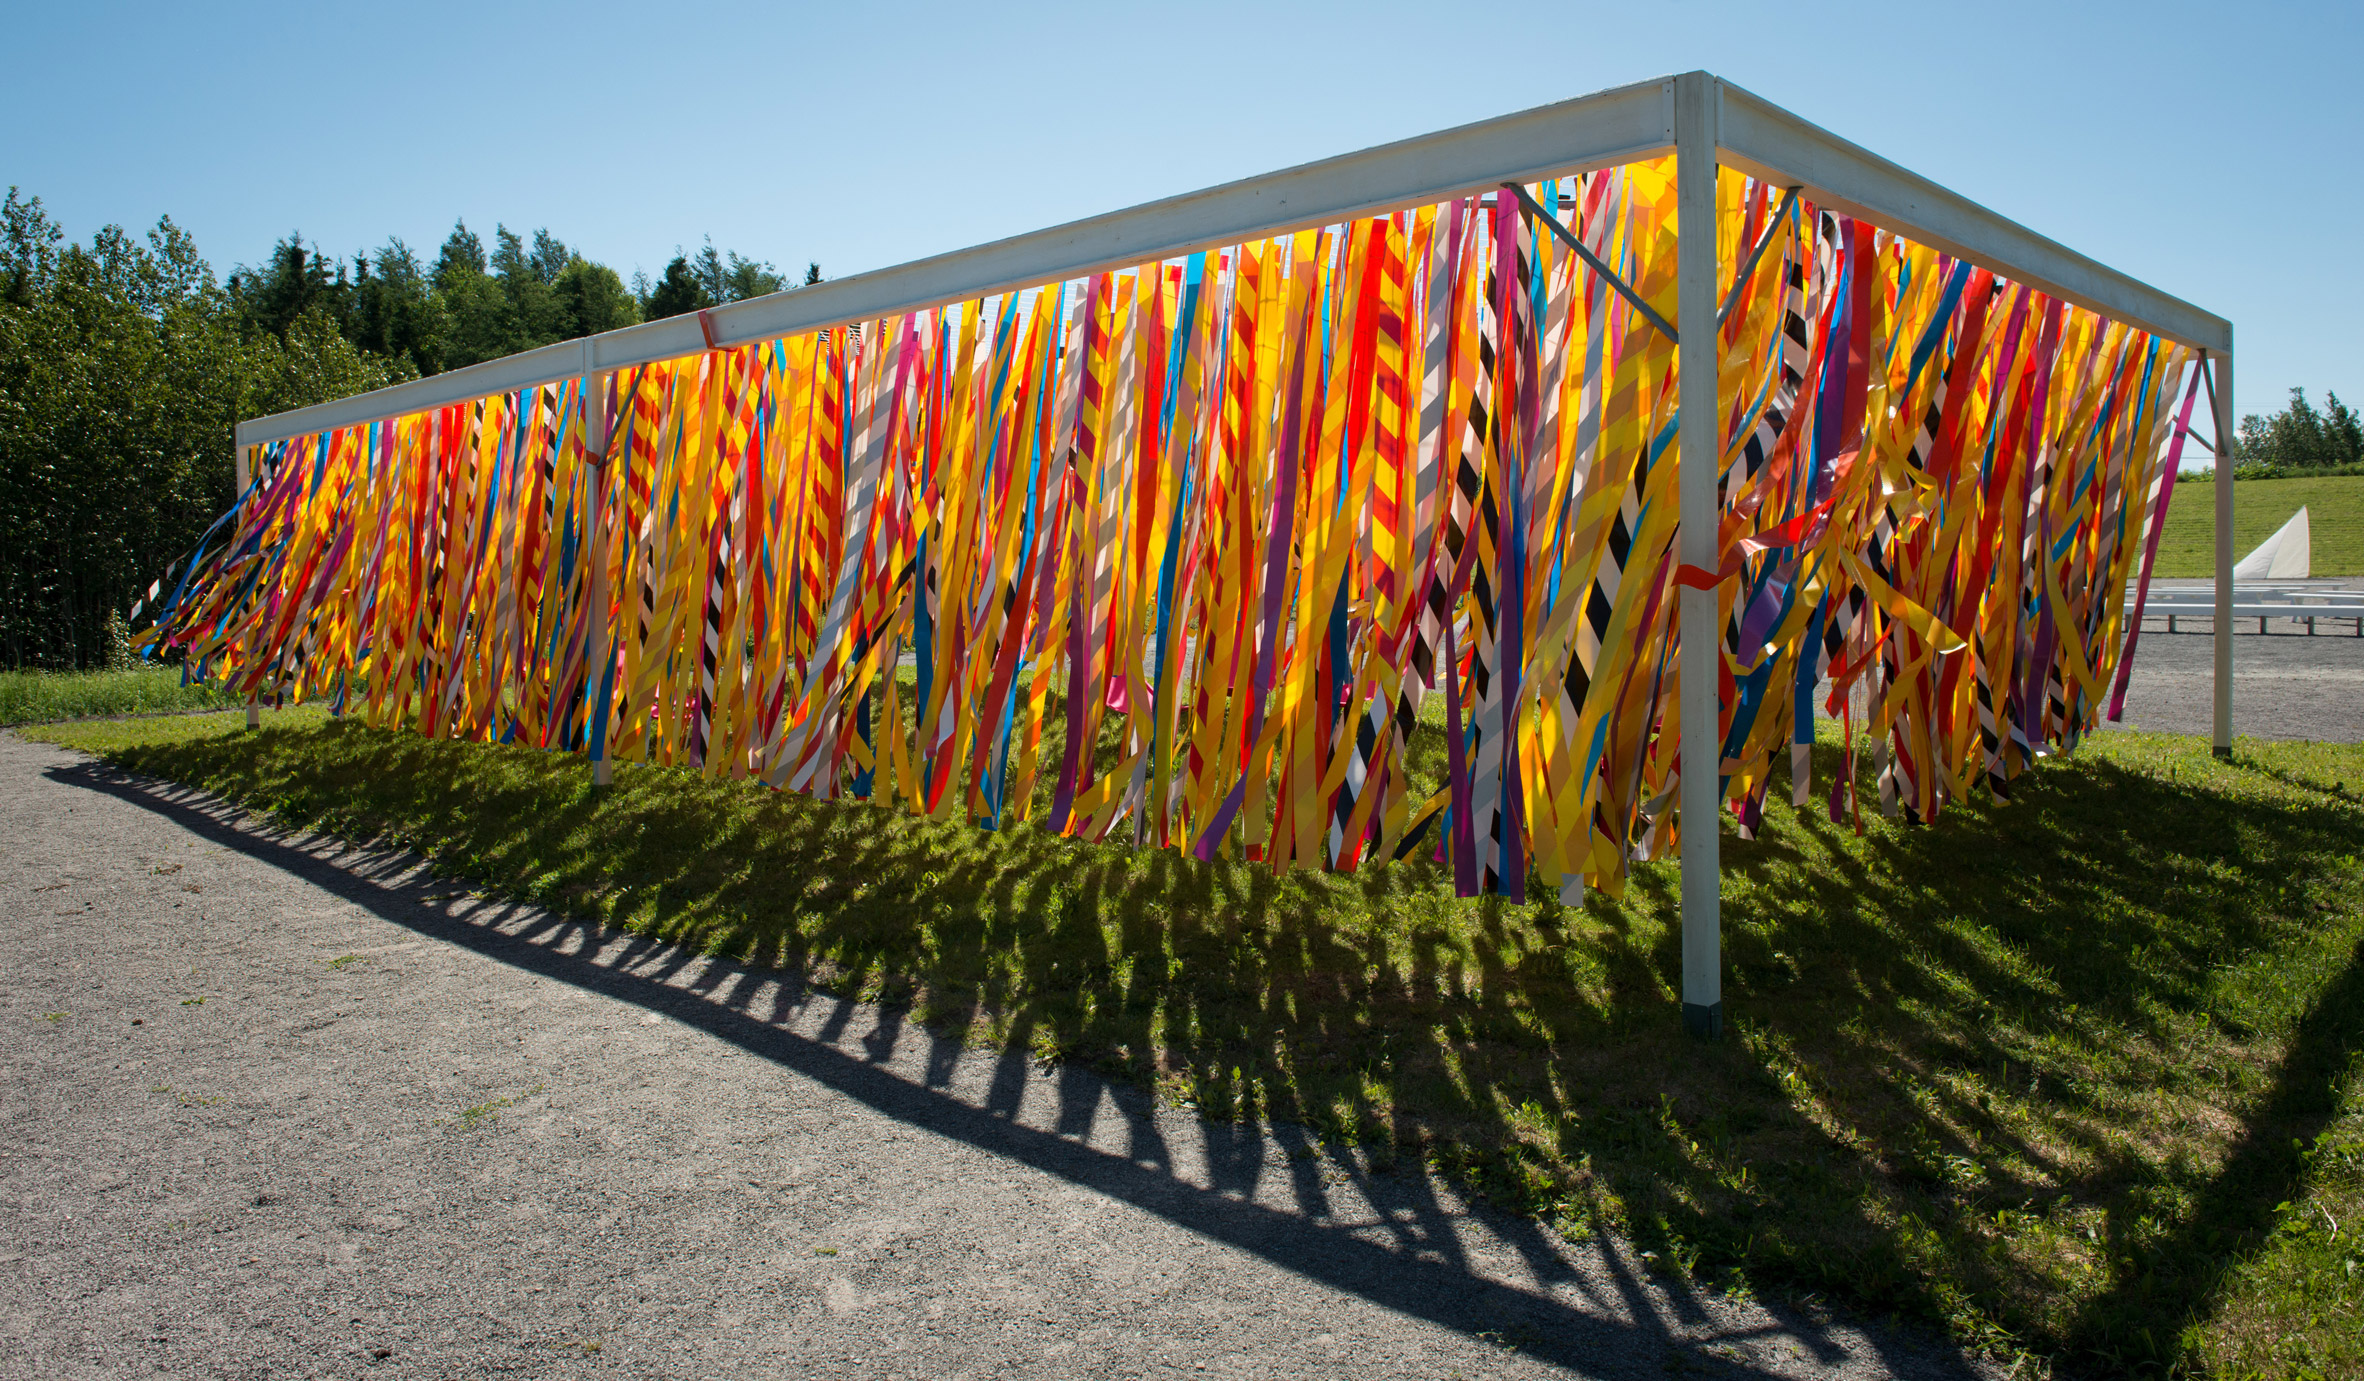 Windswept ribbons and giant cocoon among installations at Quebec garden festival